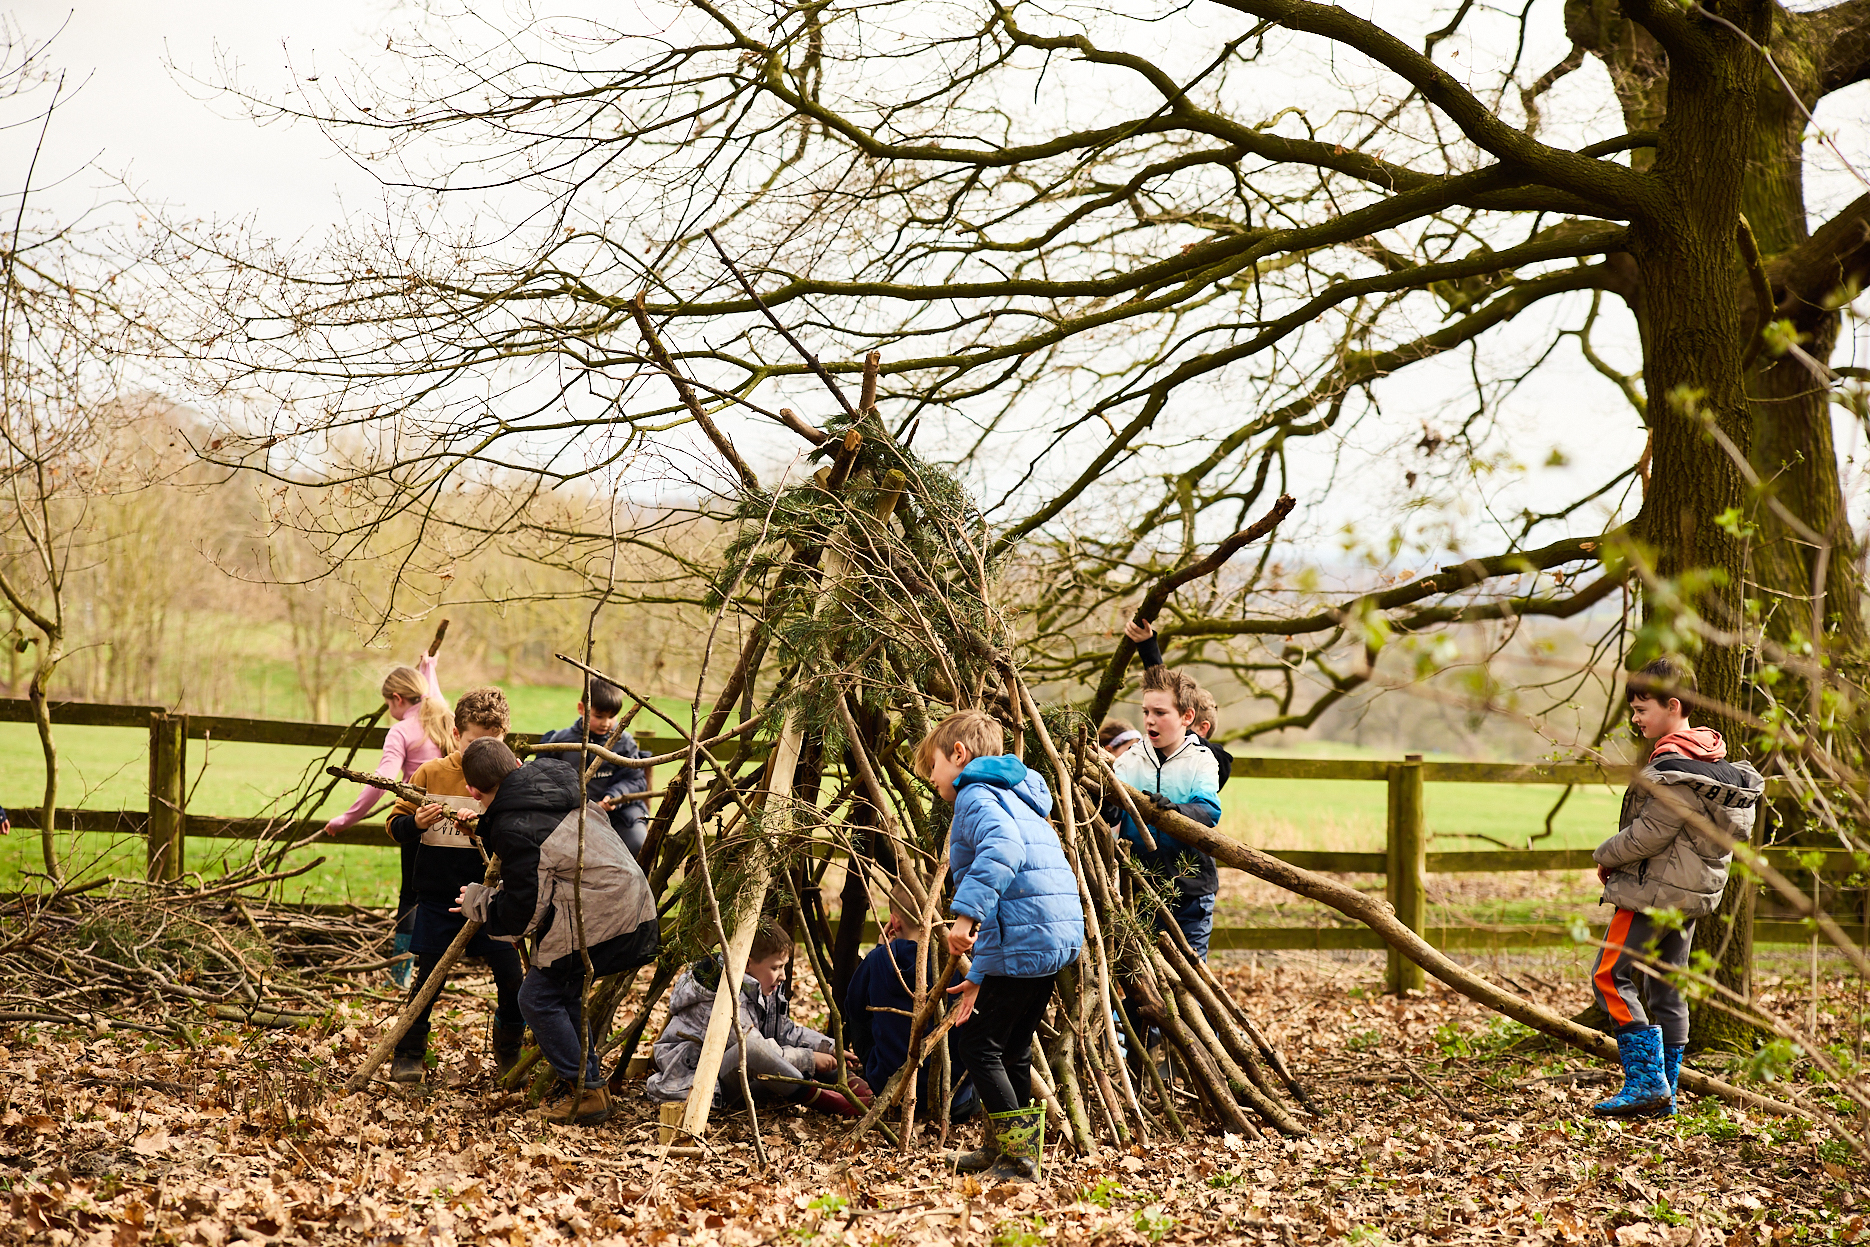 A group of children building a den out of sticks.